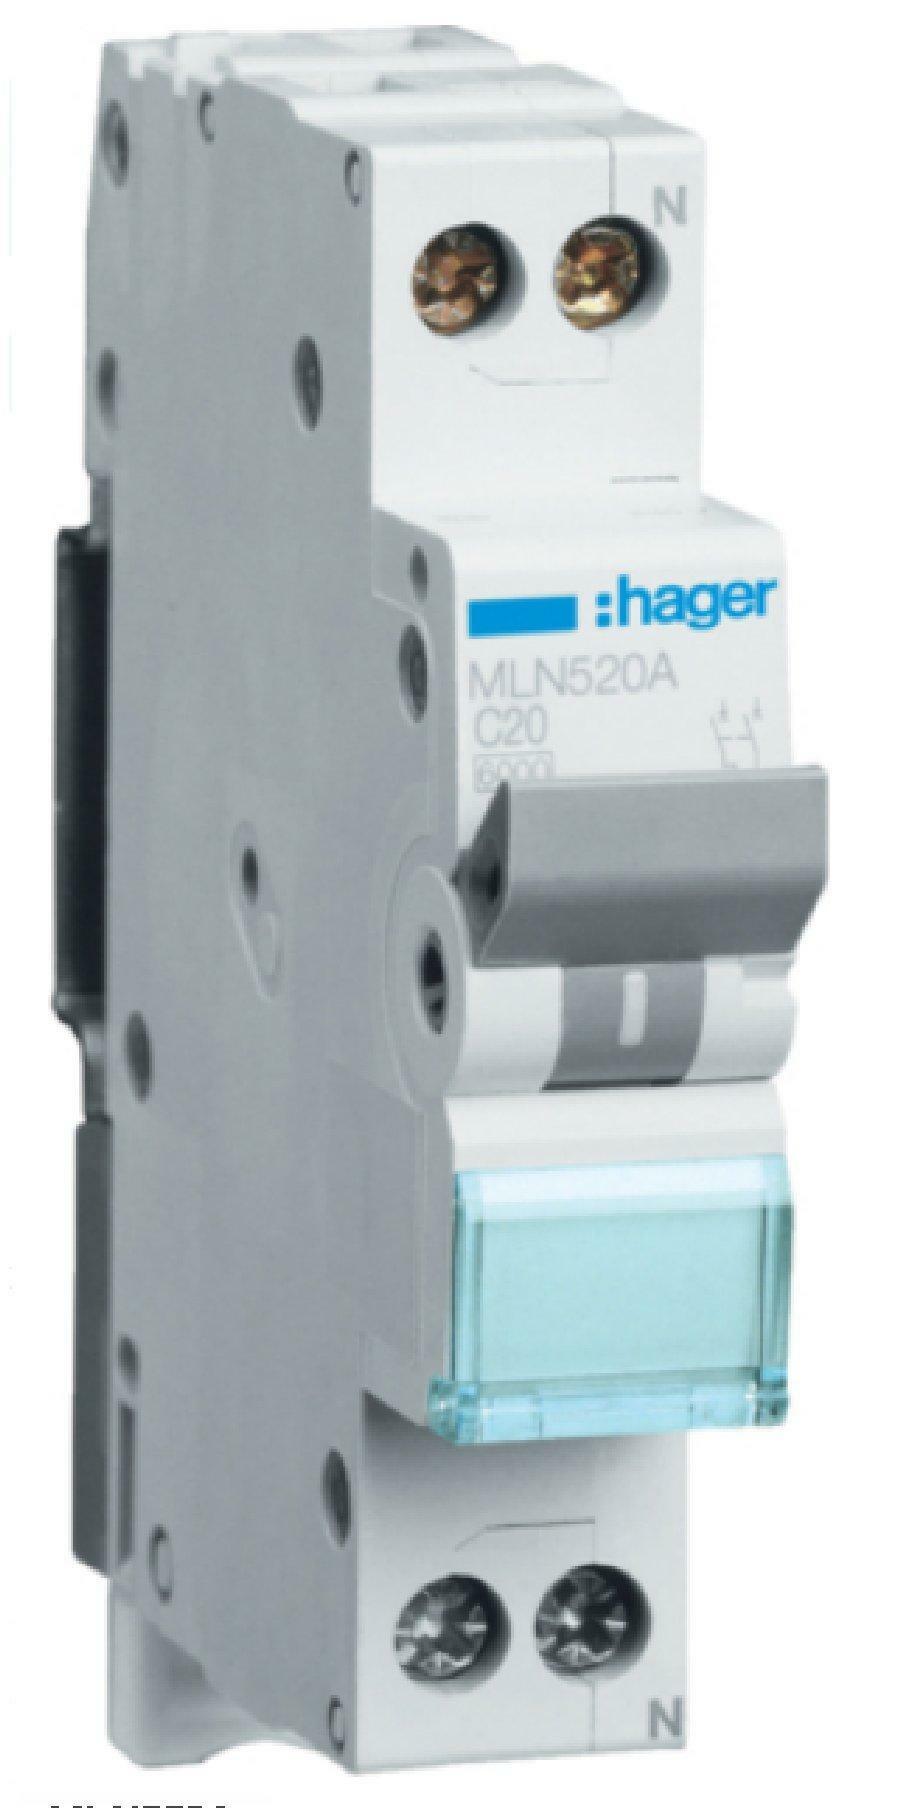 hager hager interruttore automatico 1p+n 20a 6 ka c 1m mln520a